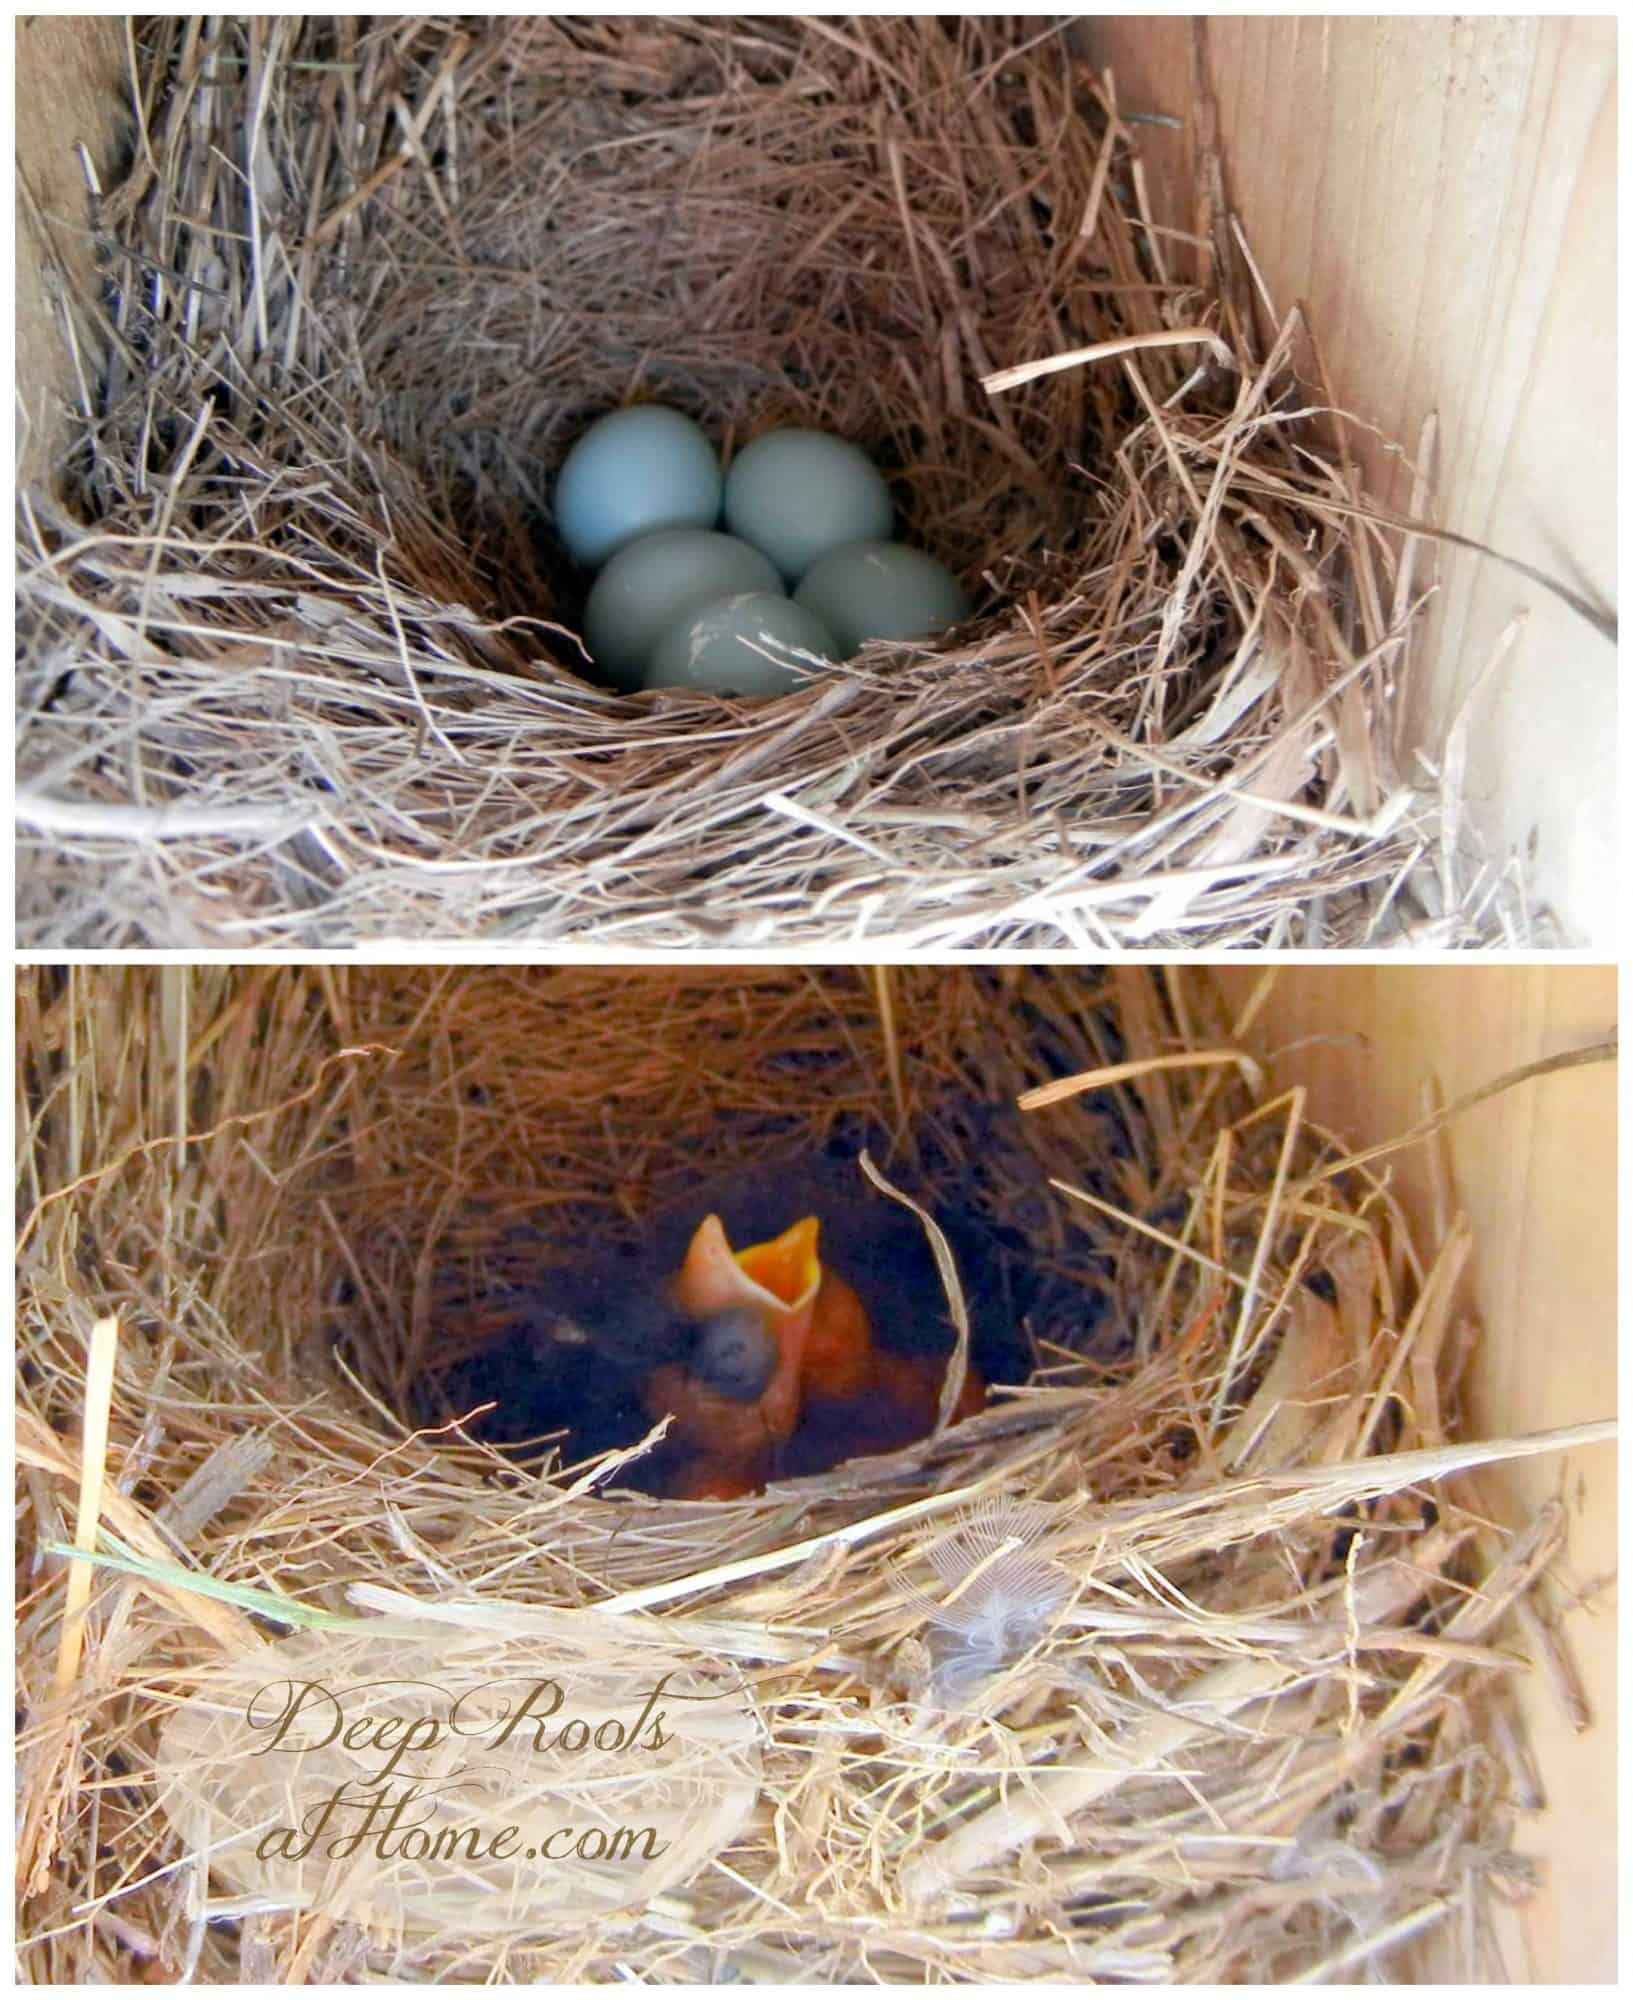 All eggs hatch at once, babies in nest box